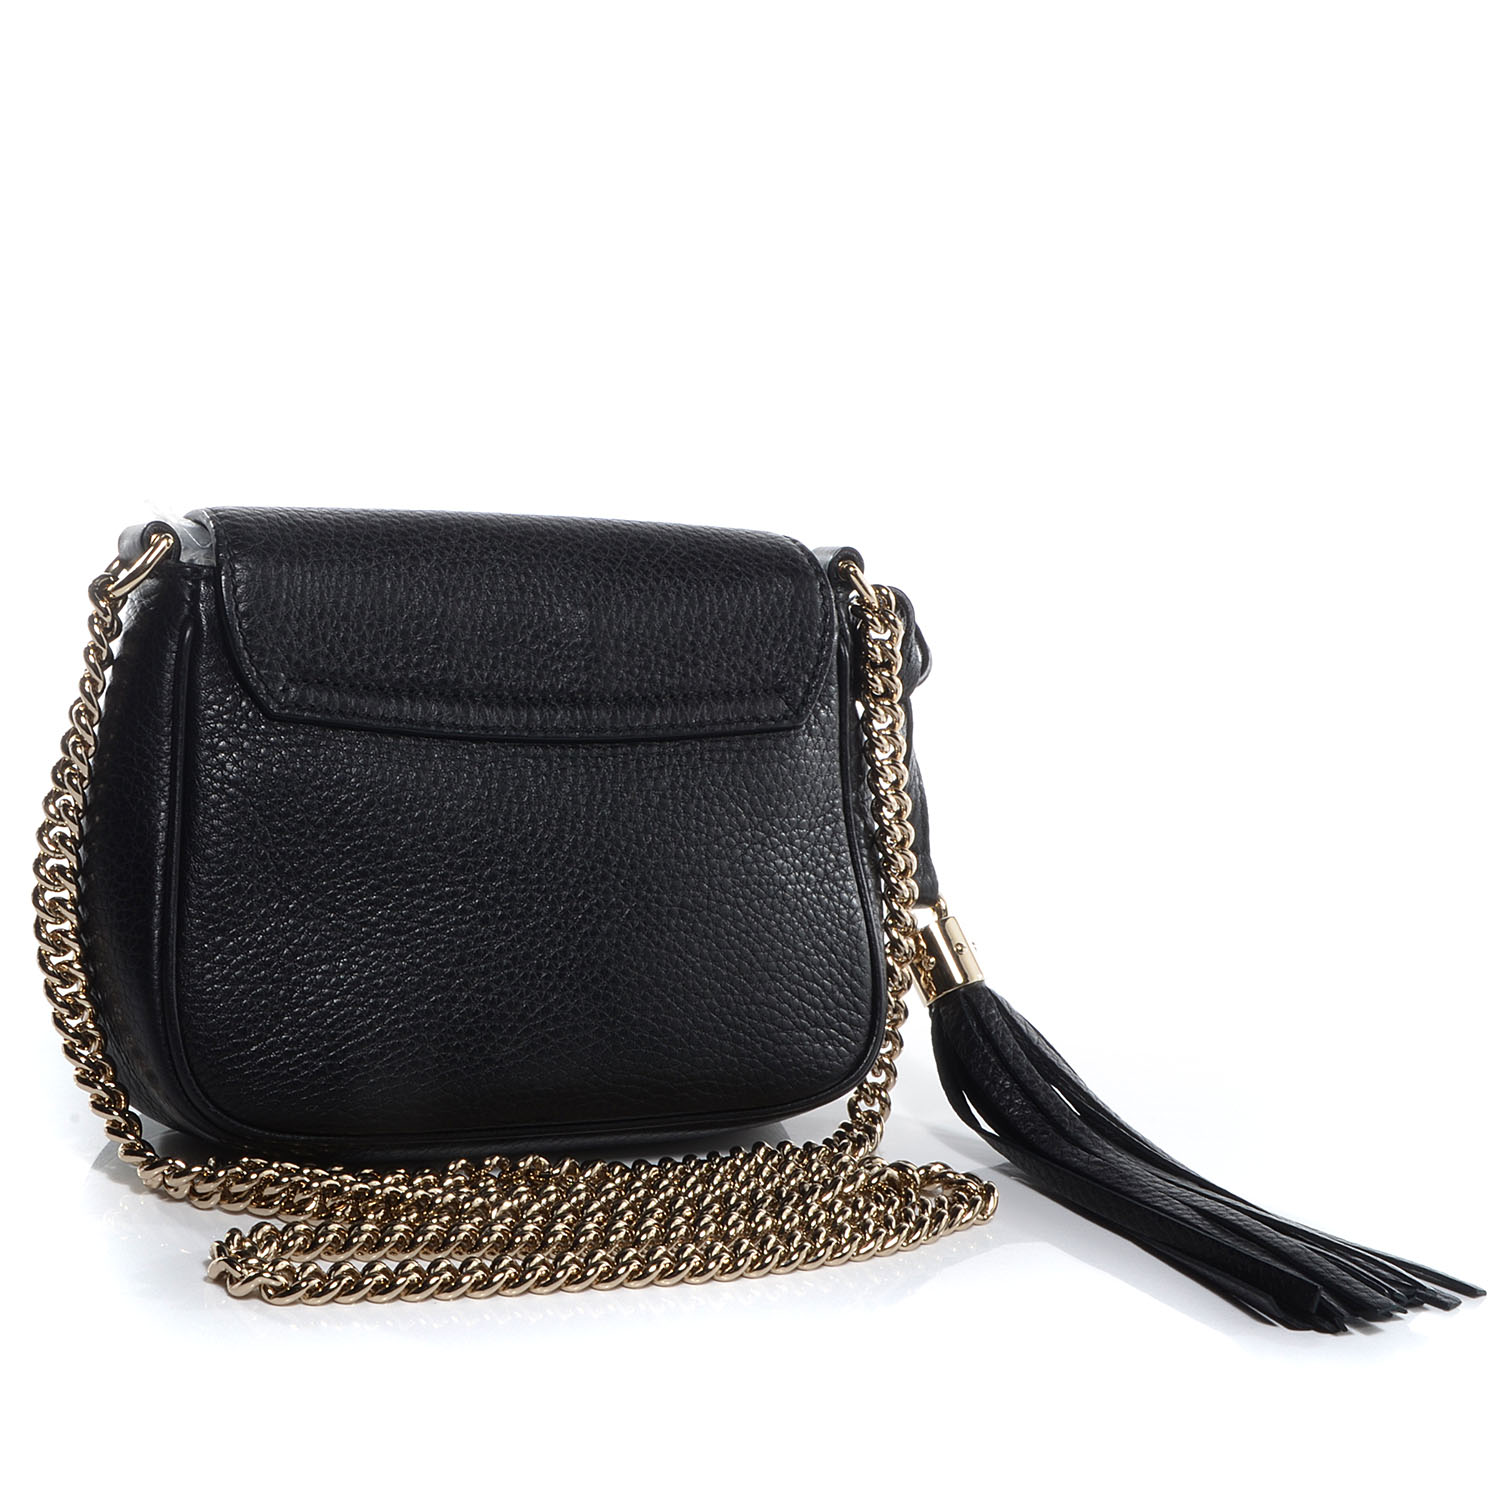 GUCCI Leather Small Soho Chain Shoulder Bag Black 74957